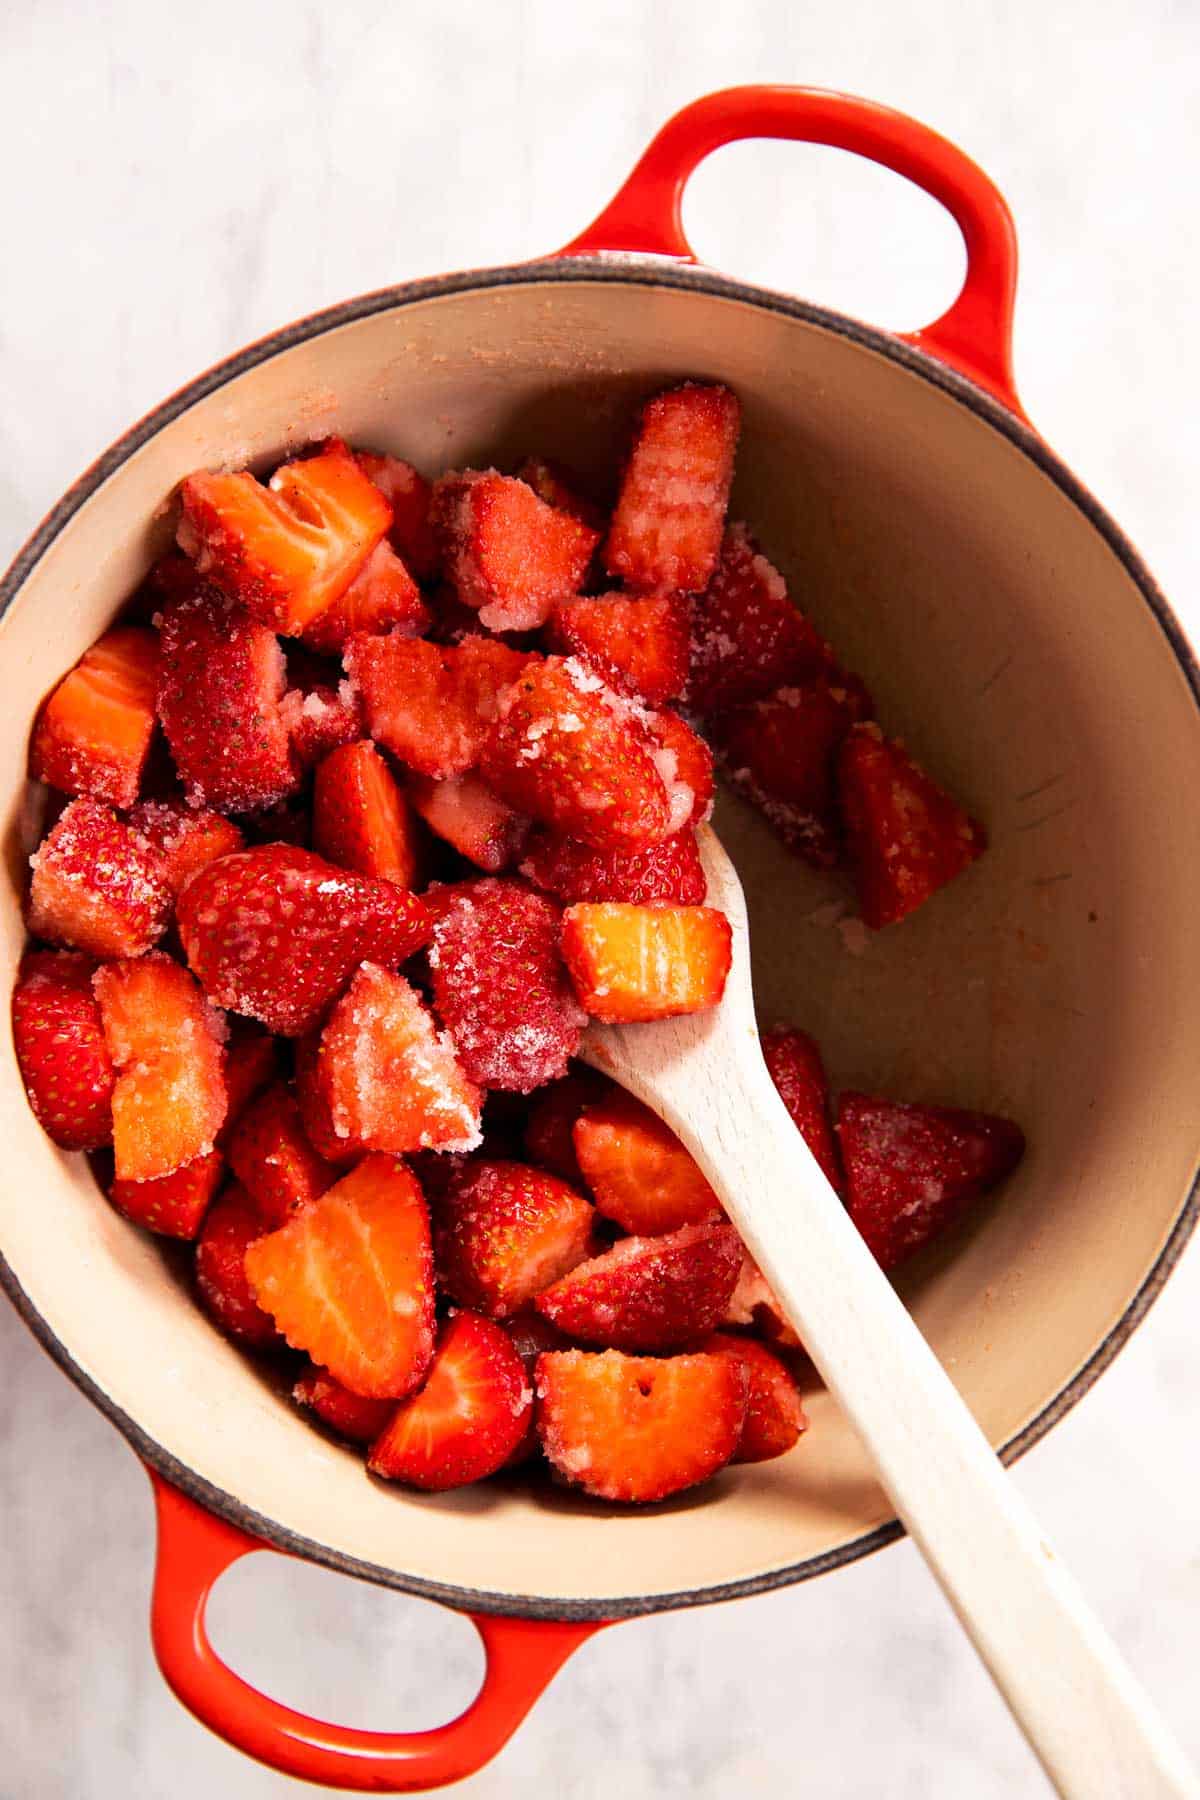 strawberries combined with sugar and cornstarch slurry in Dutch oven